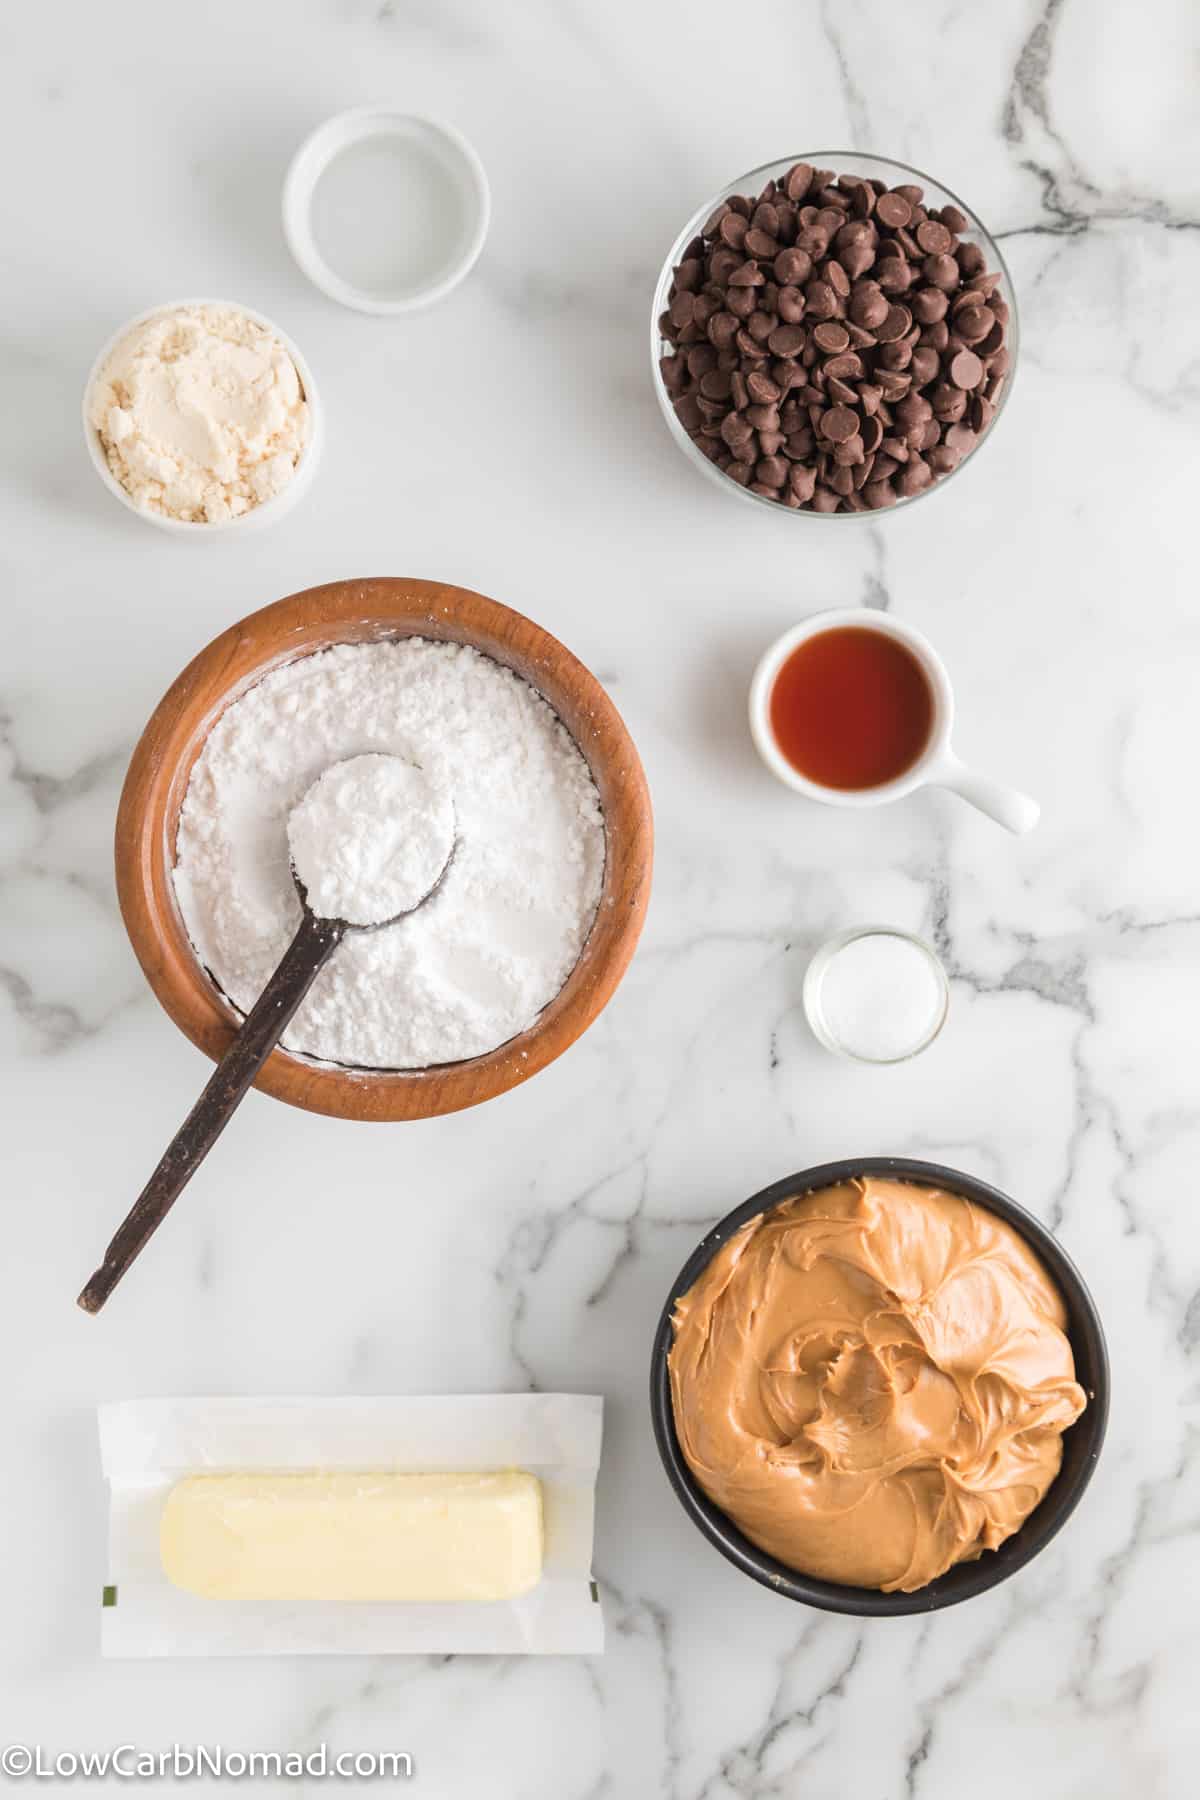 Keto Chocolate Peanut Butter Cups ingredients